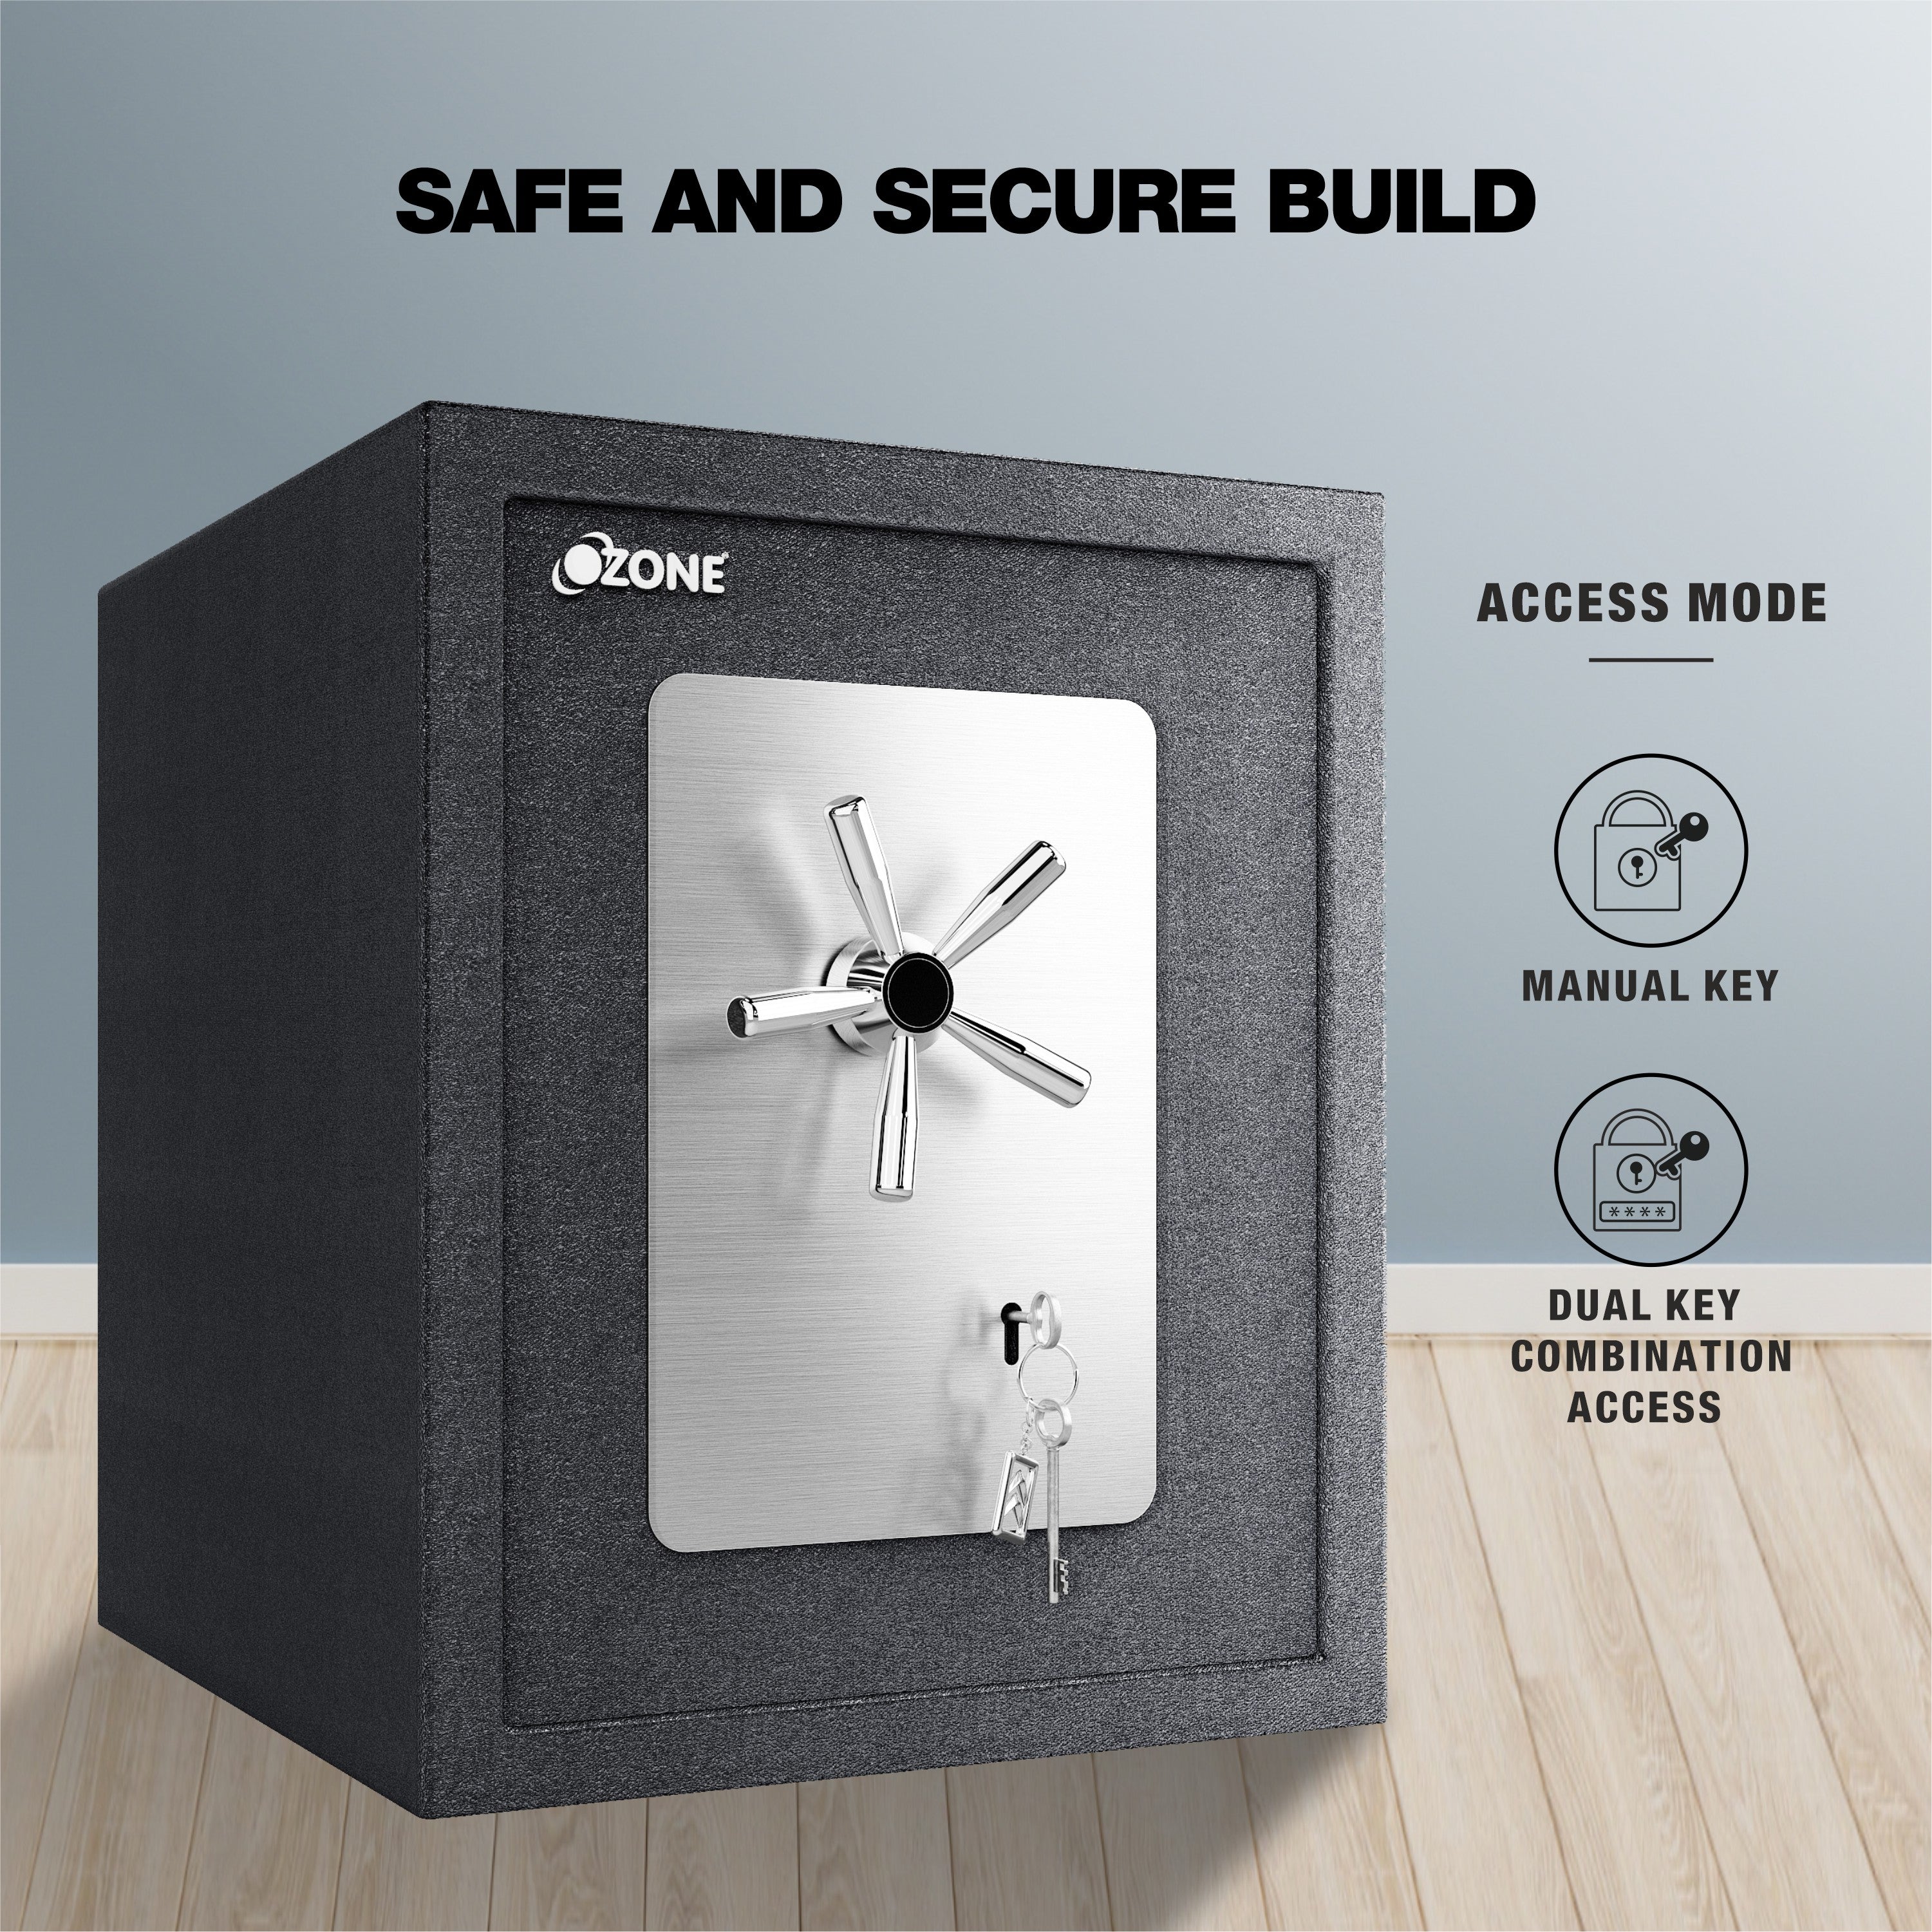 Ozone Anti-burglary Safe for Home & Business | High-security Mechanical Key (78 Ltrs.)